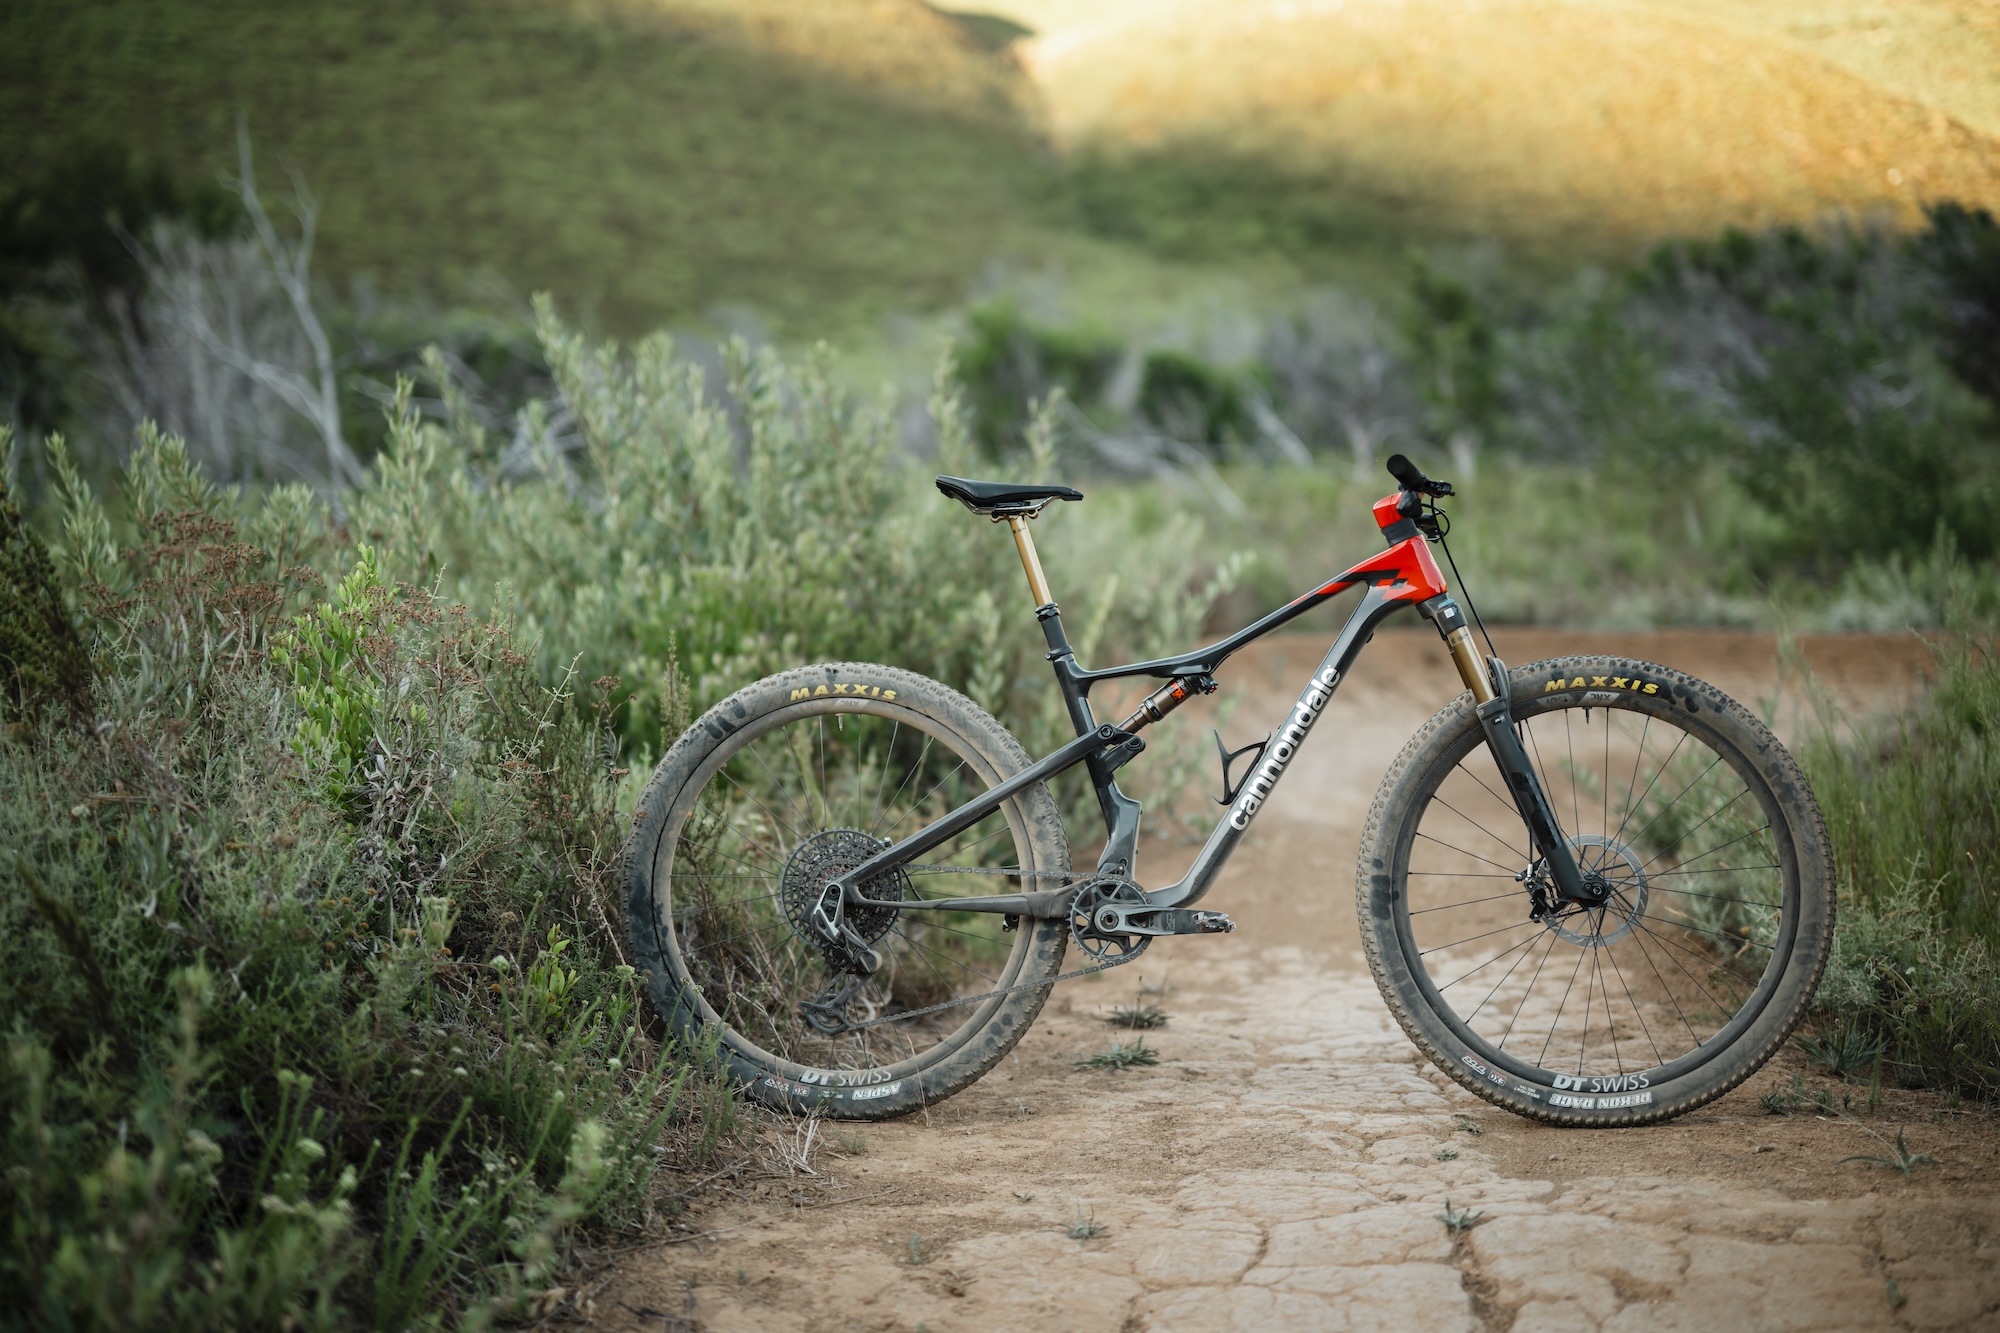 Zack Henderson reviews the Cannondale Scalpel